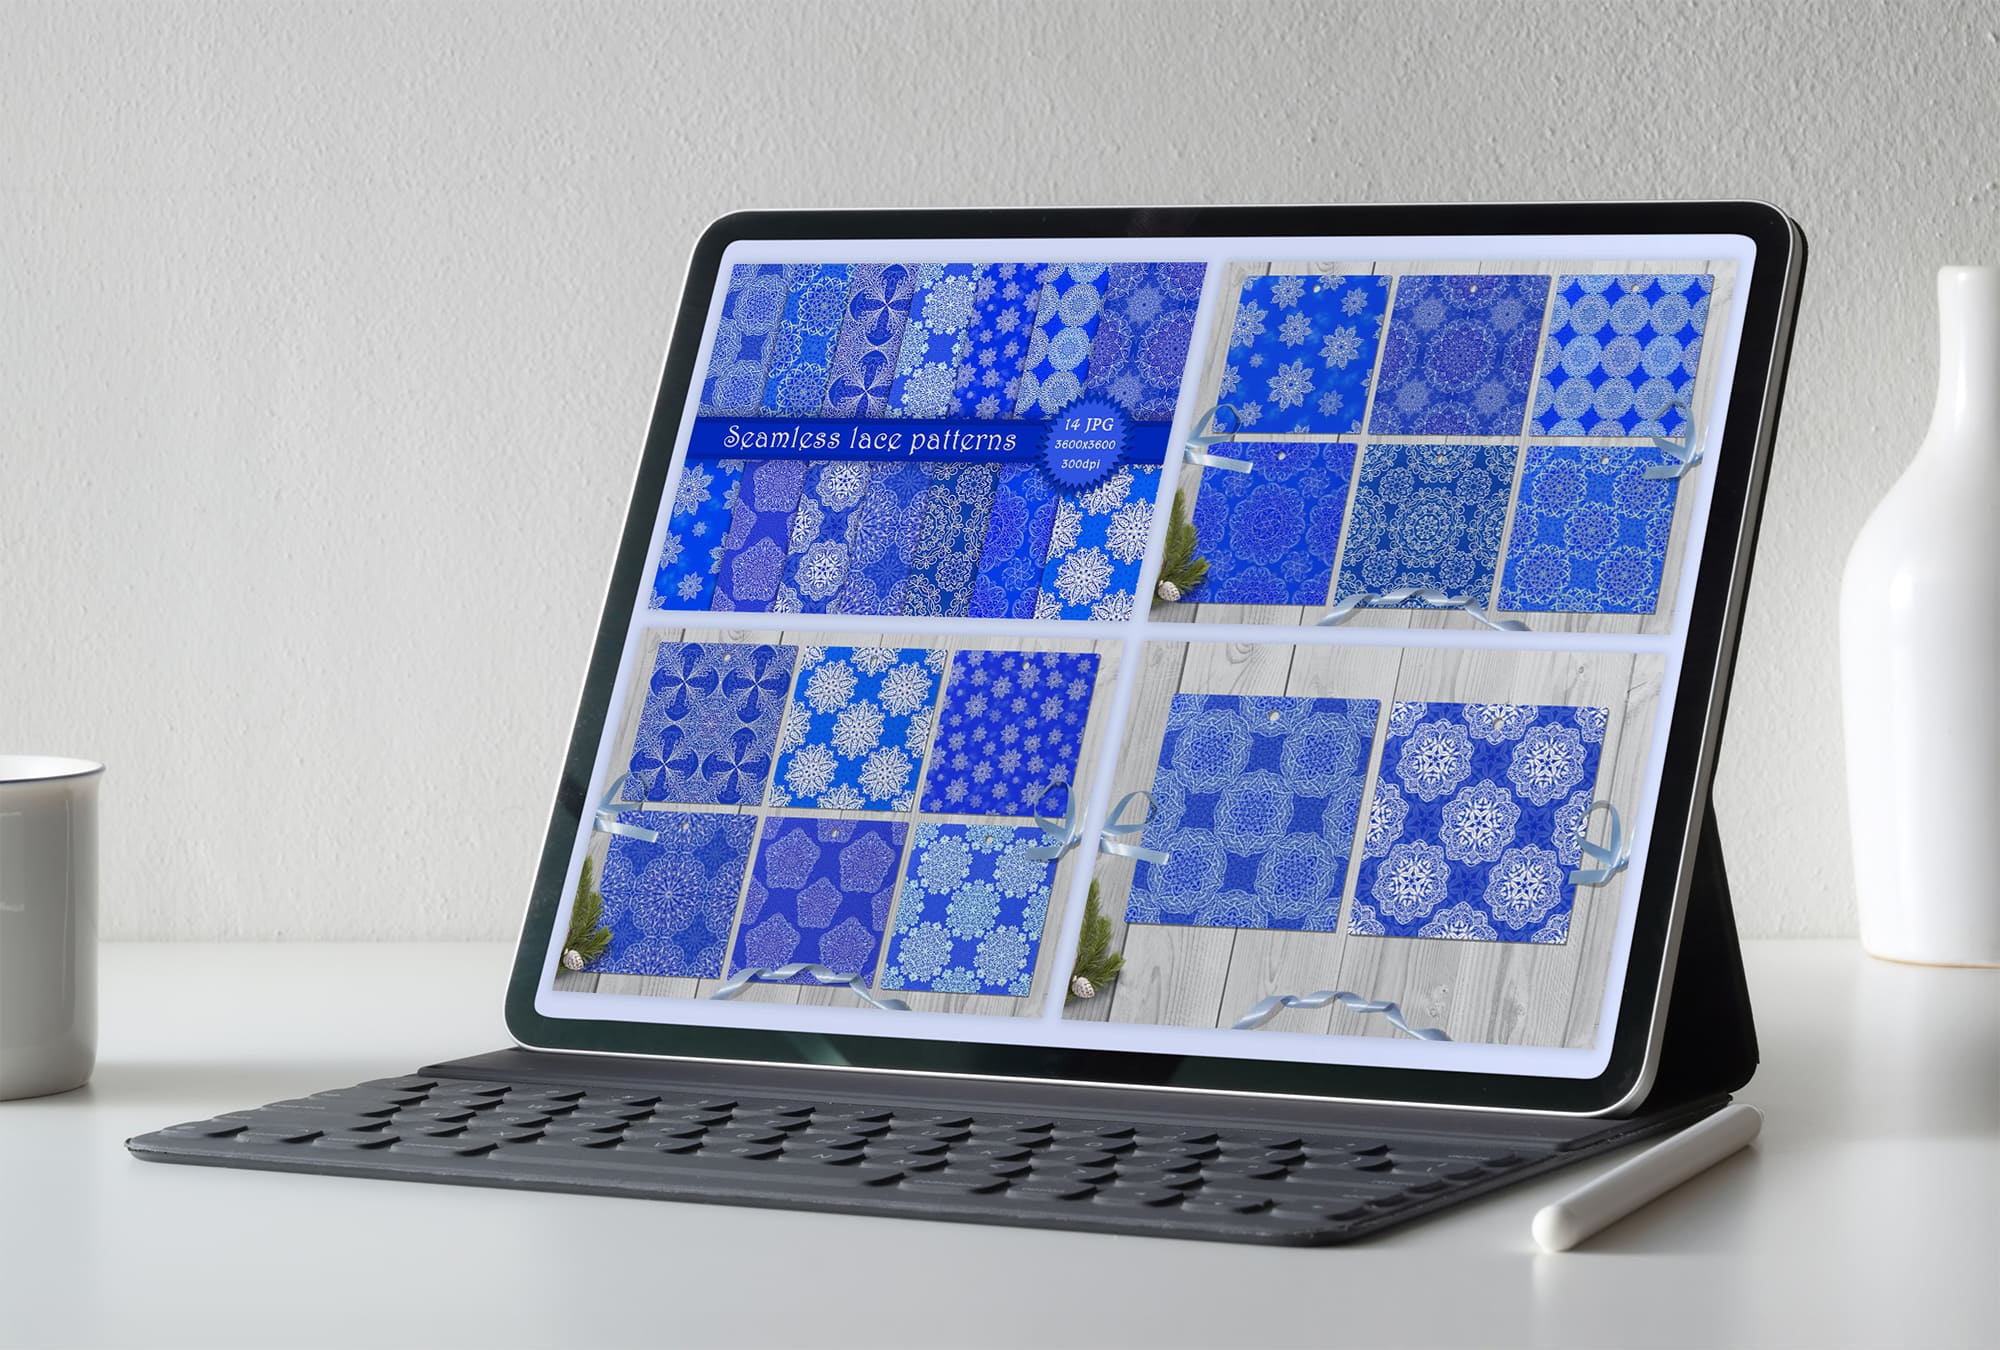 An example of iPad mockup with 4 different seamless patterns in blue and white.